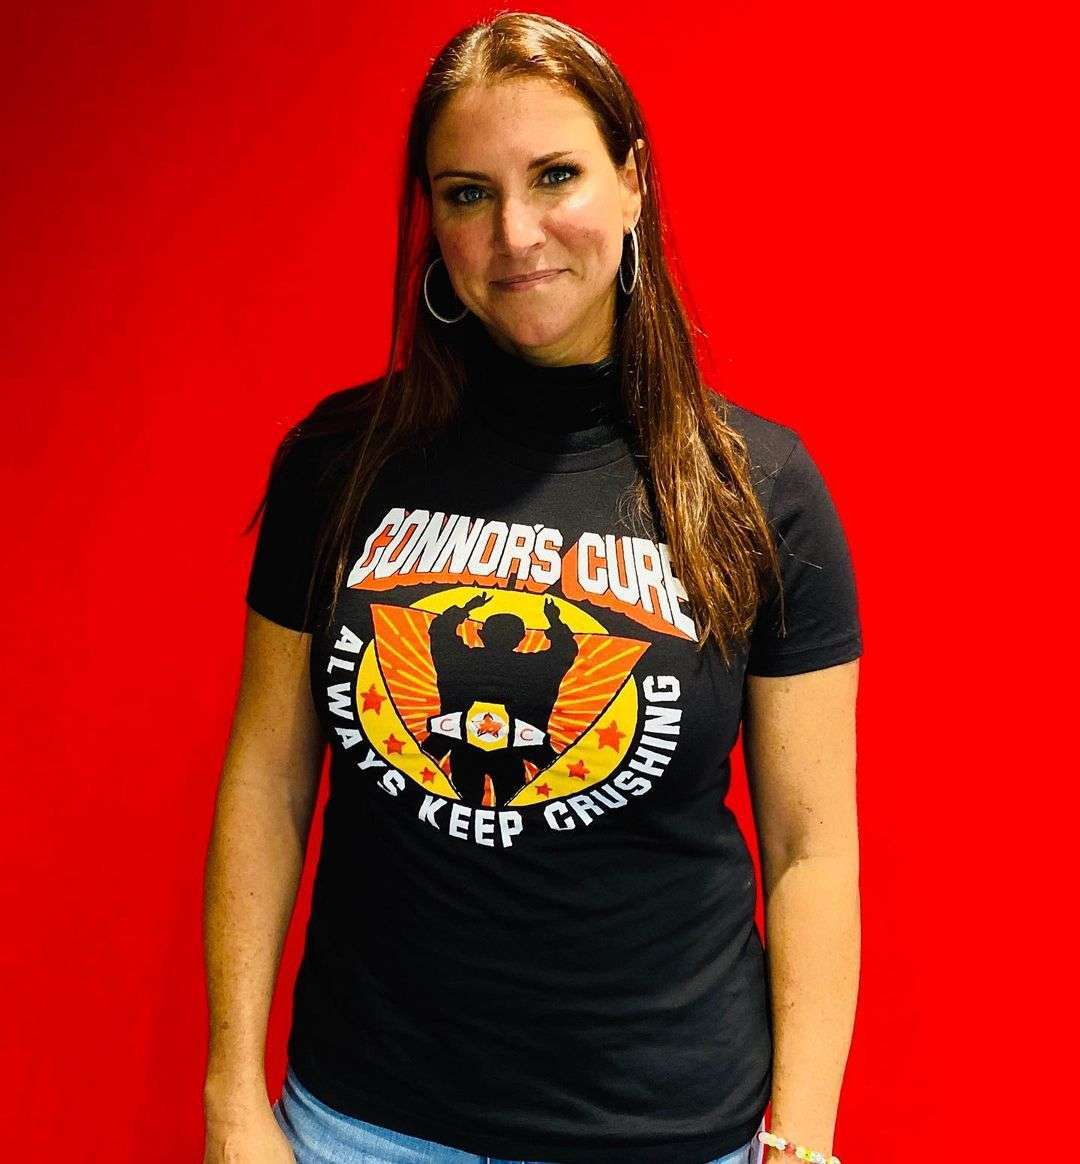 80+ Hot Pictures Of Stephanie McMahon WWE Diva | Best Of Comic Books